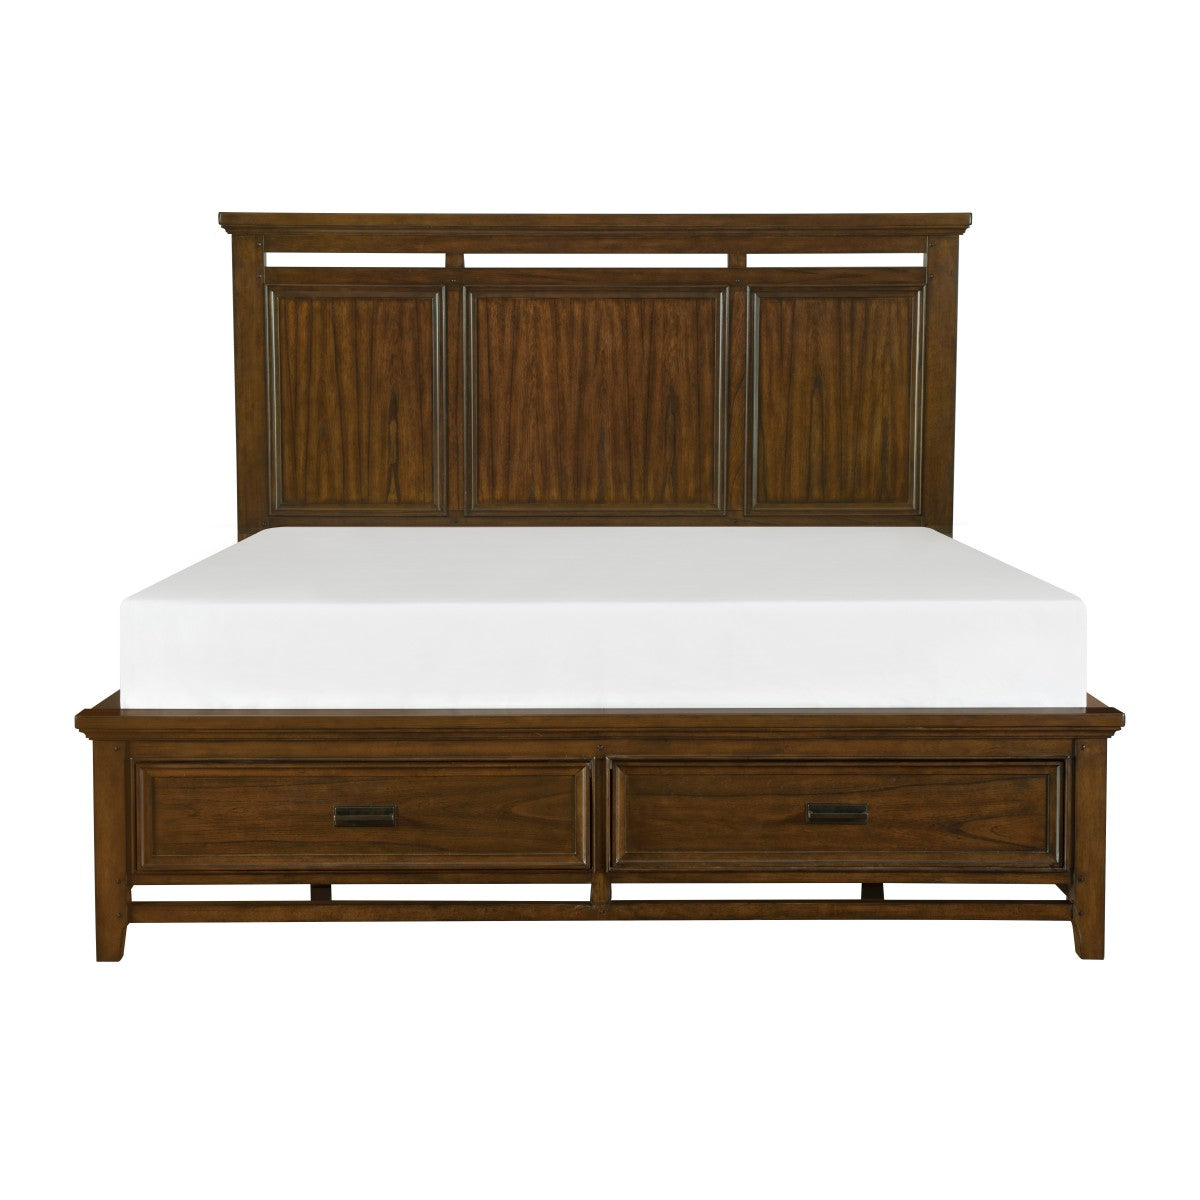 Frazier Park Brown Cherry Modern Contemporary Solid Wood Upholstered Storage Queen Platform Bed